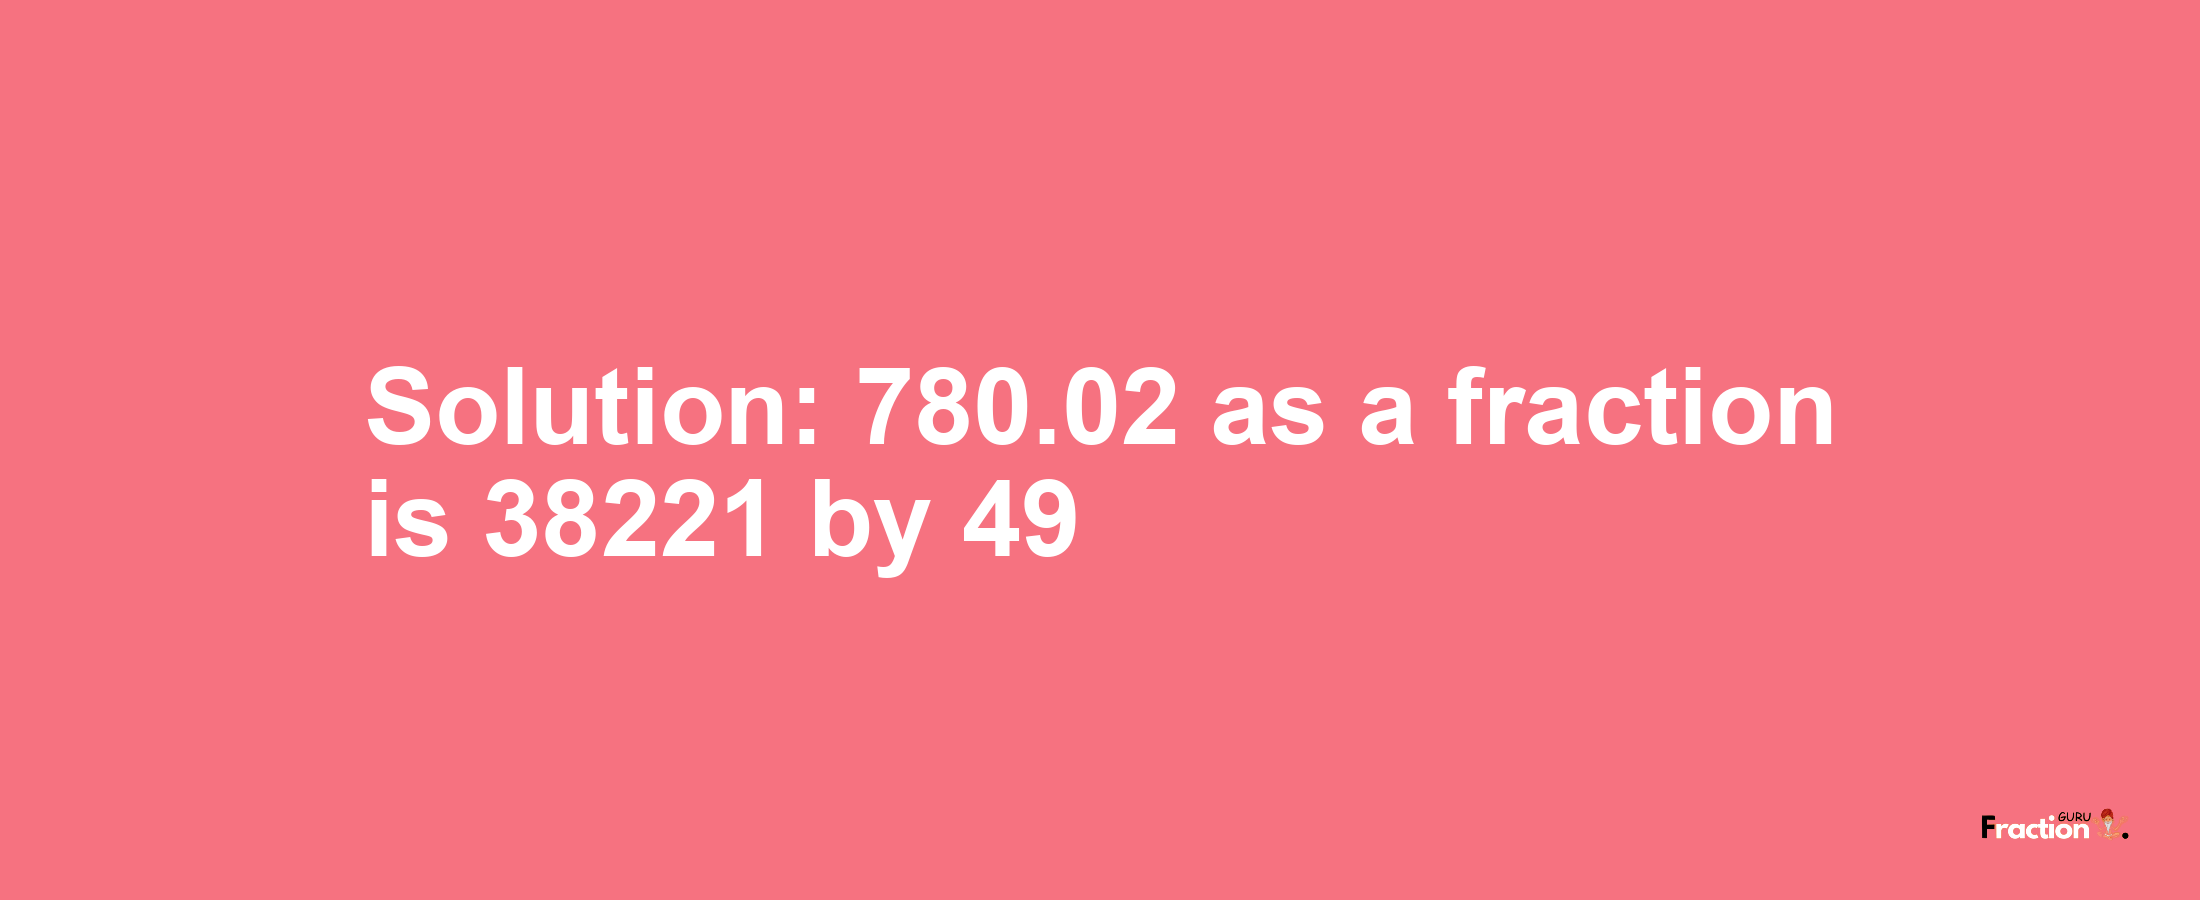 Solution:780.02 as a fraction is 38221/49